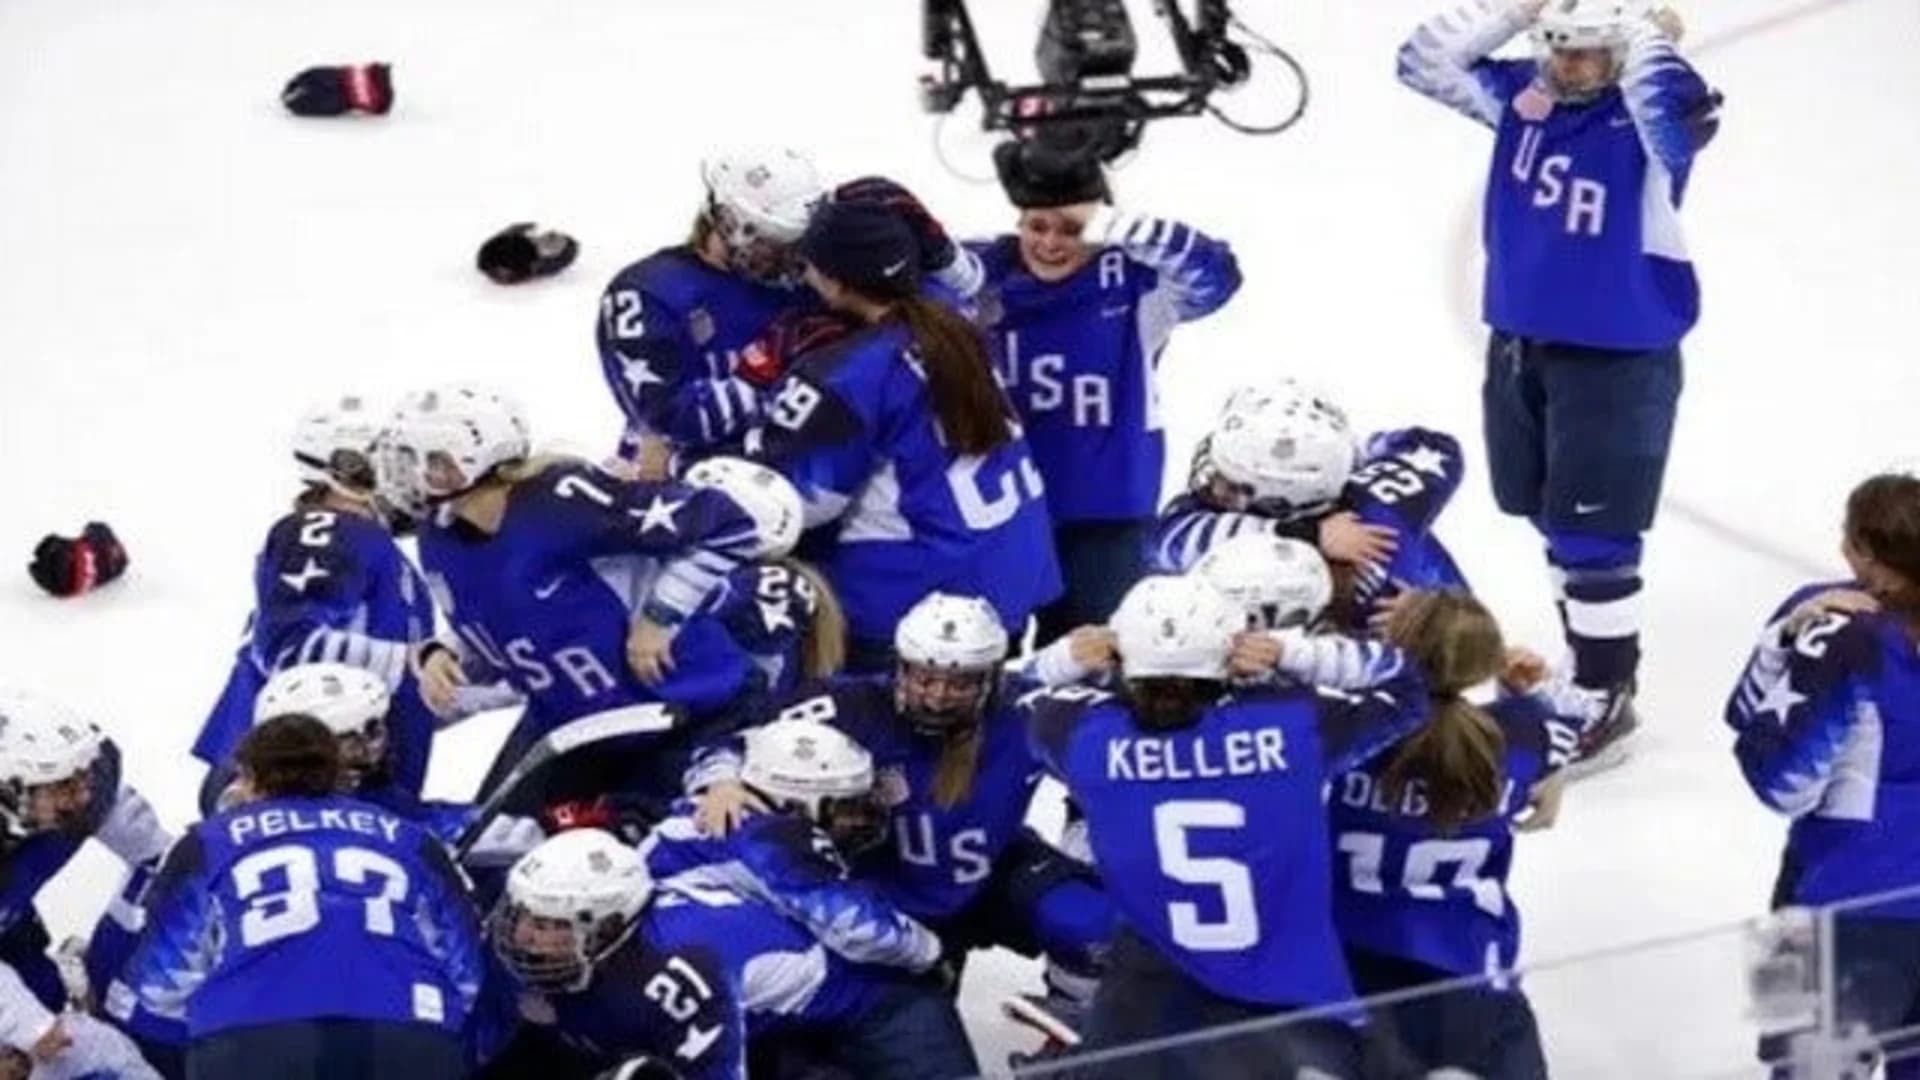 US women beat Canada for gold in a 3-2 shootout thriller